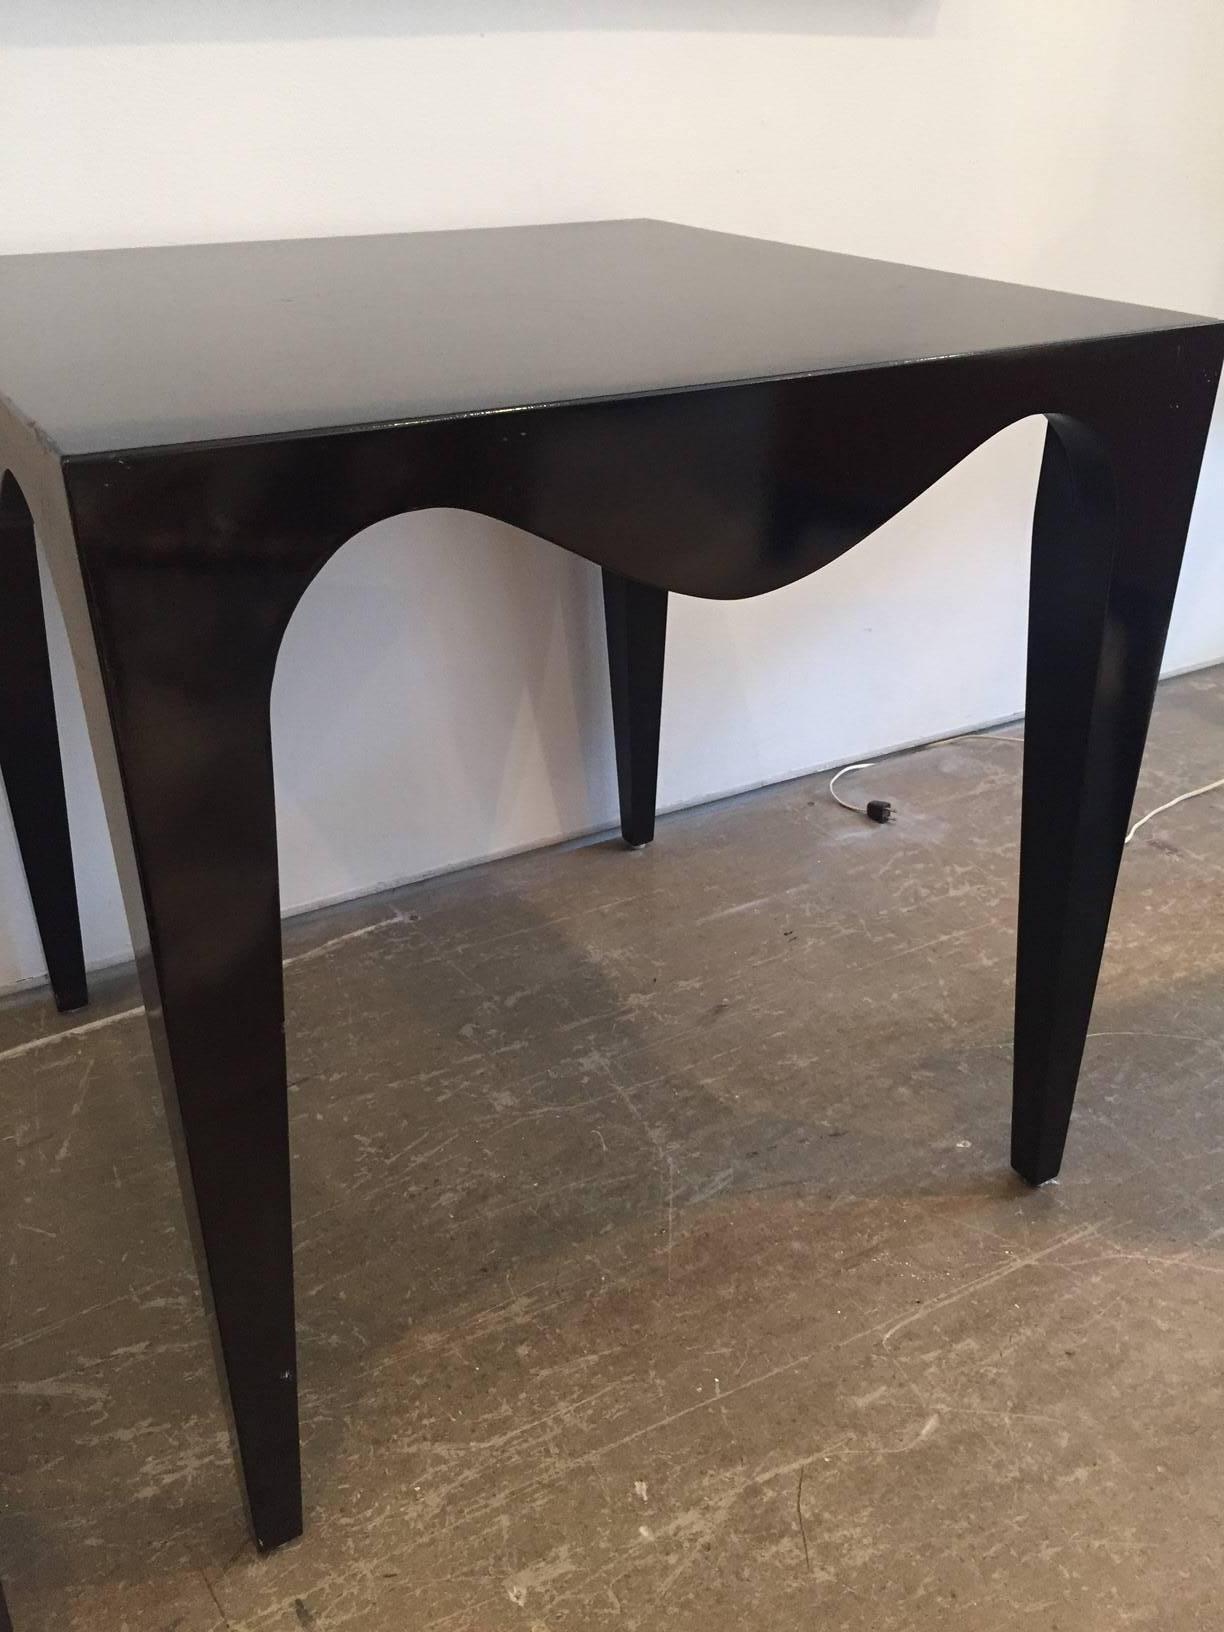 Black lacquer gaming table with curved apron detail.